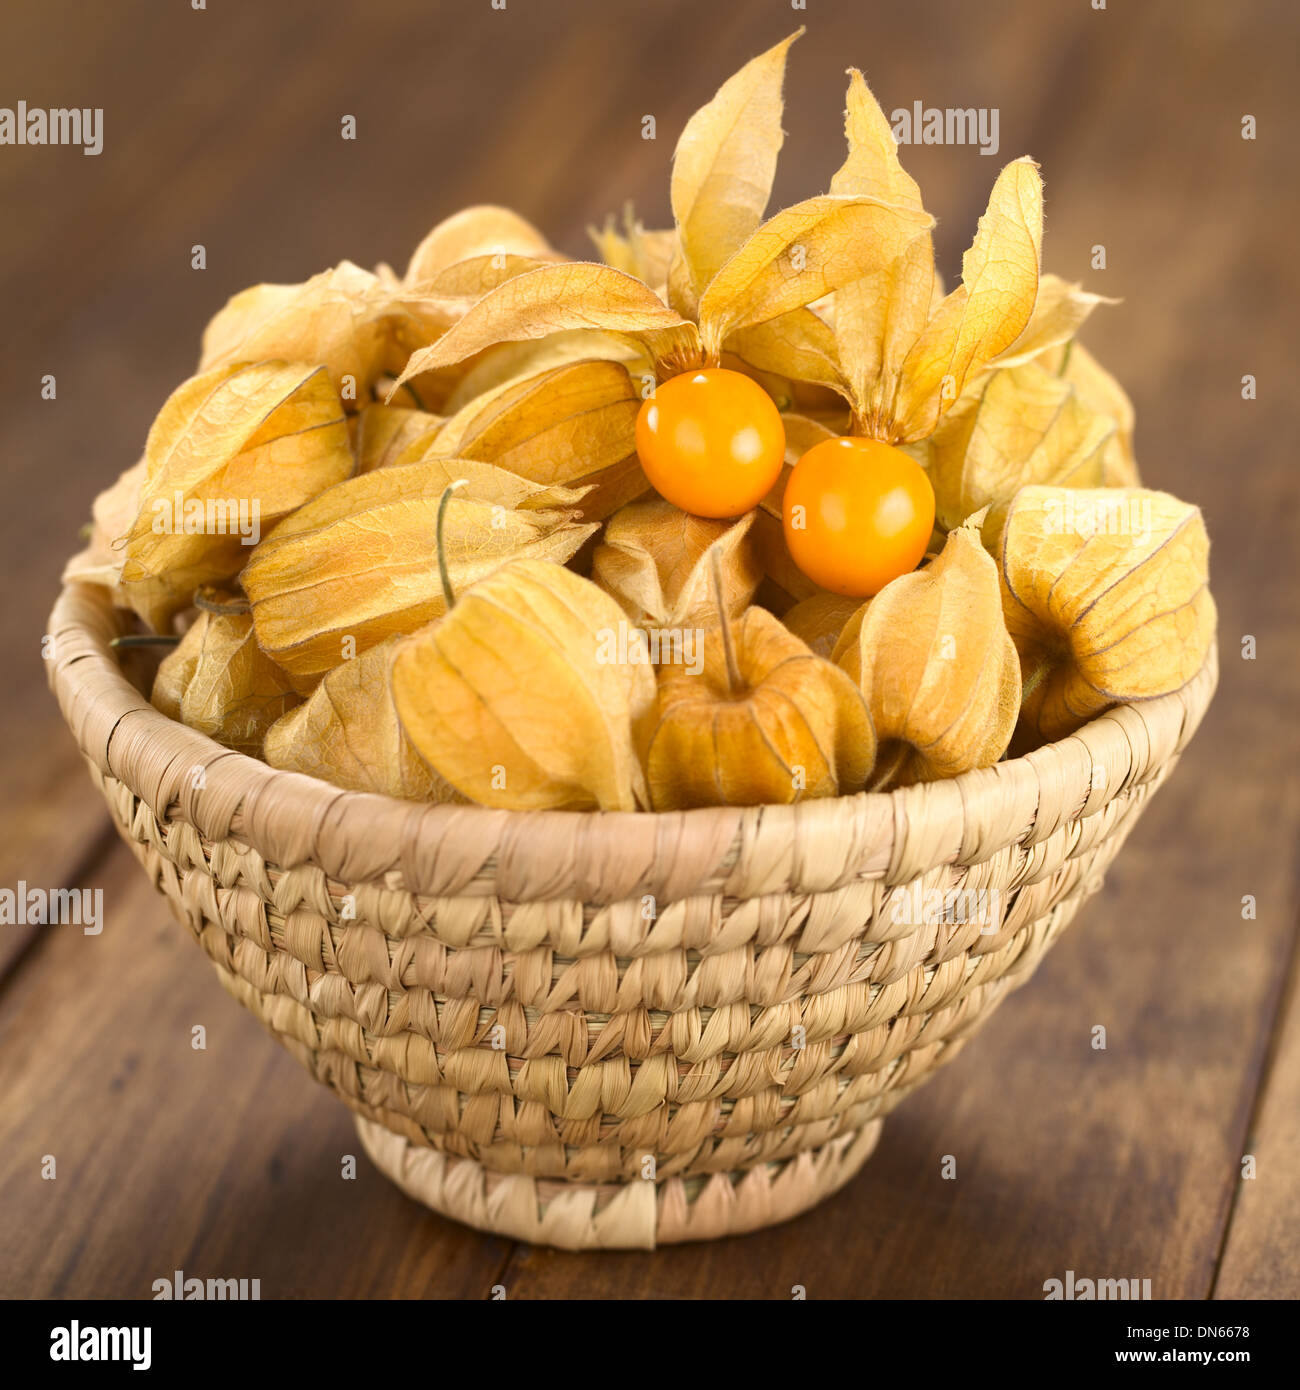 Physalis berry fruits (lat. Physalis peruviana) with husk in basket (Selective Focus, Focus on the open physalis) Stock Photo